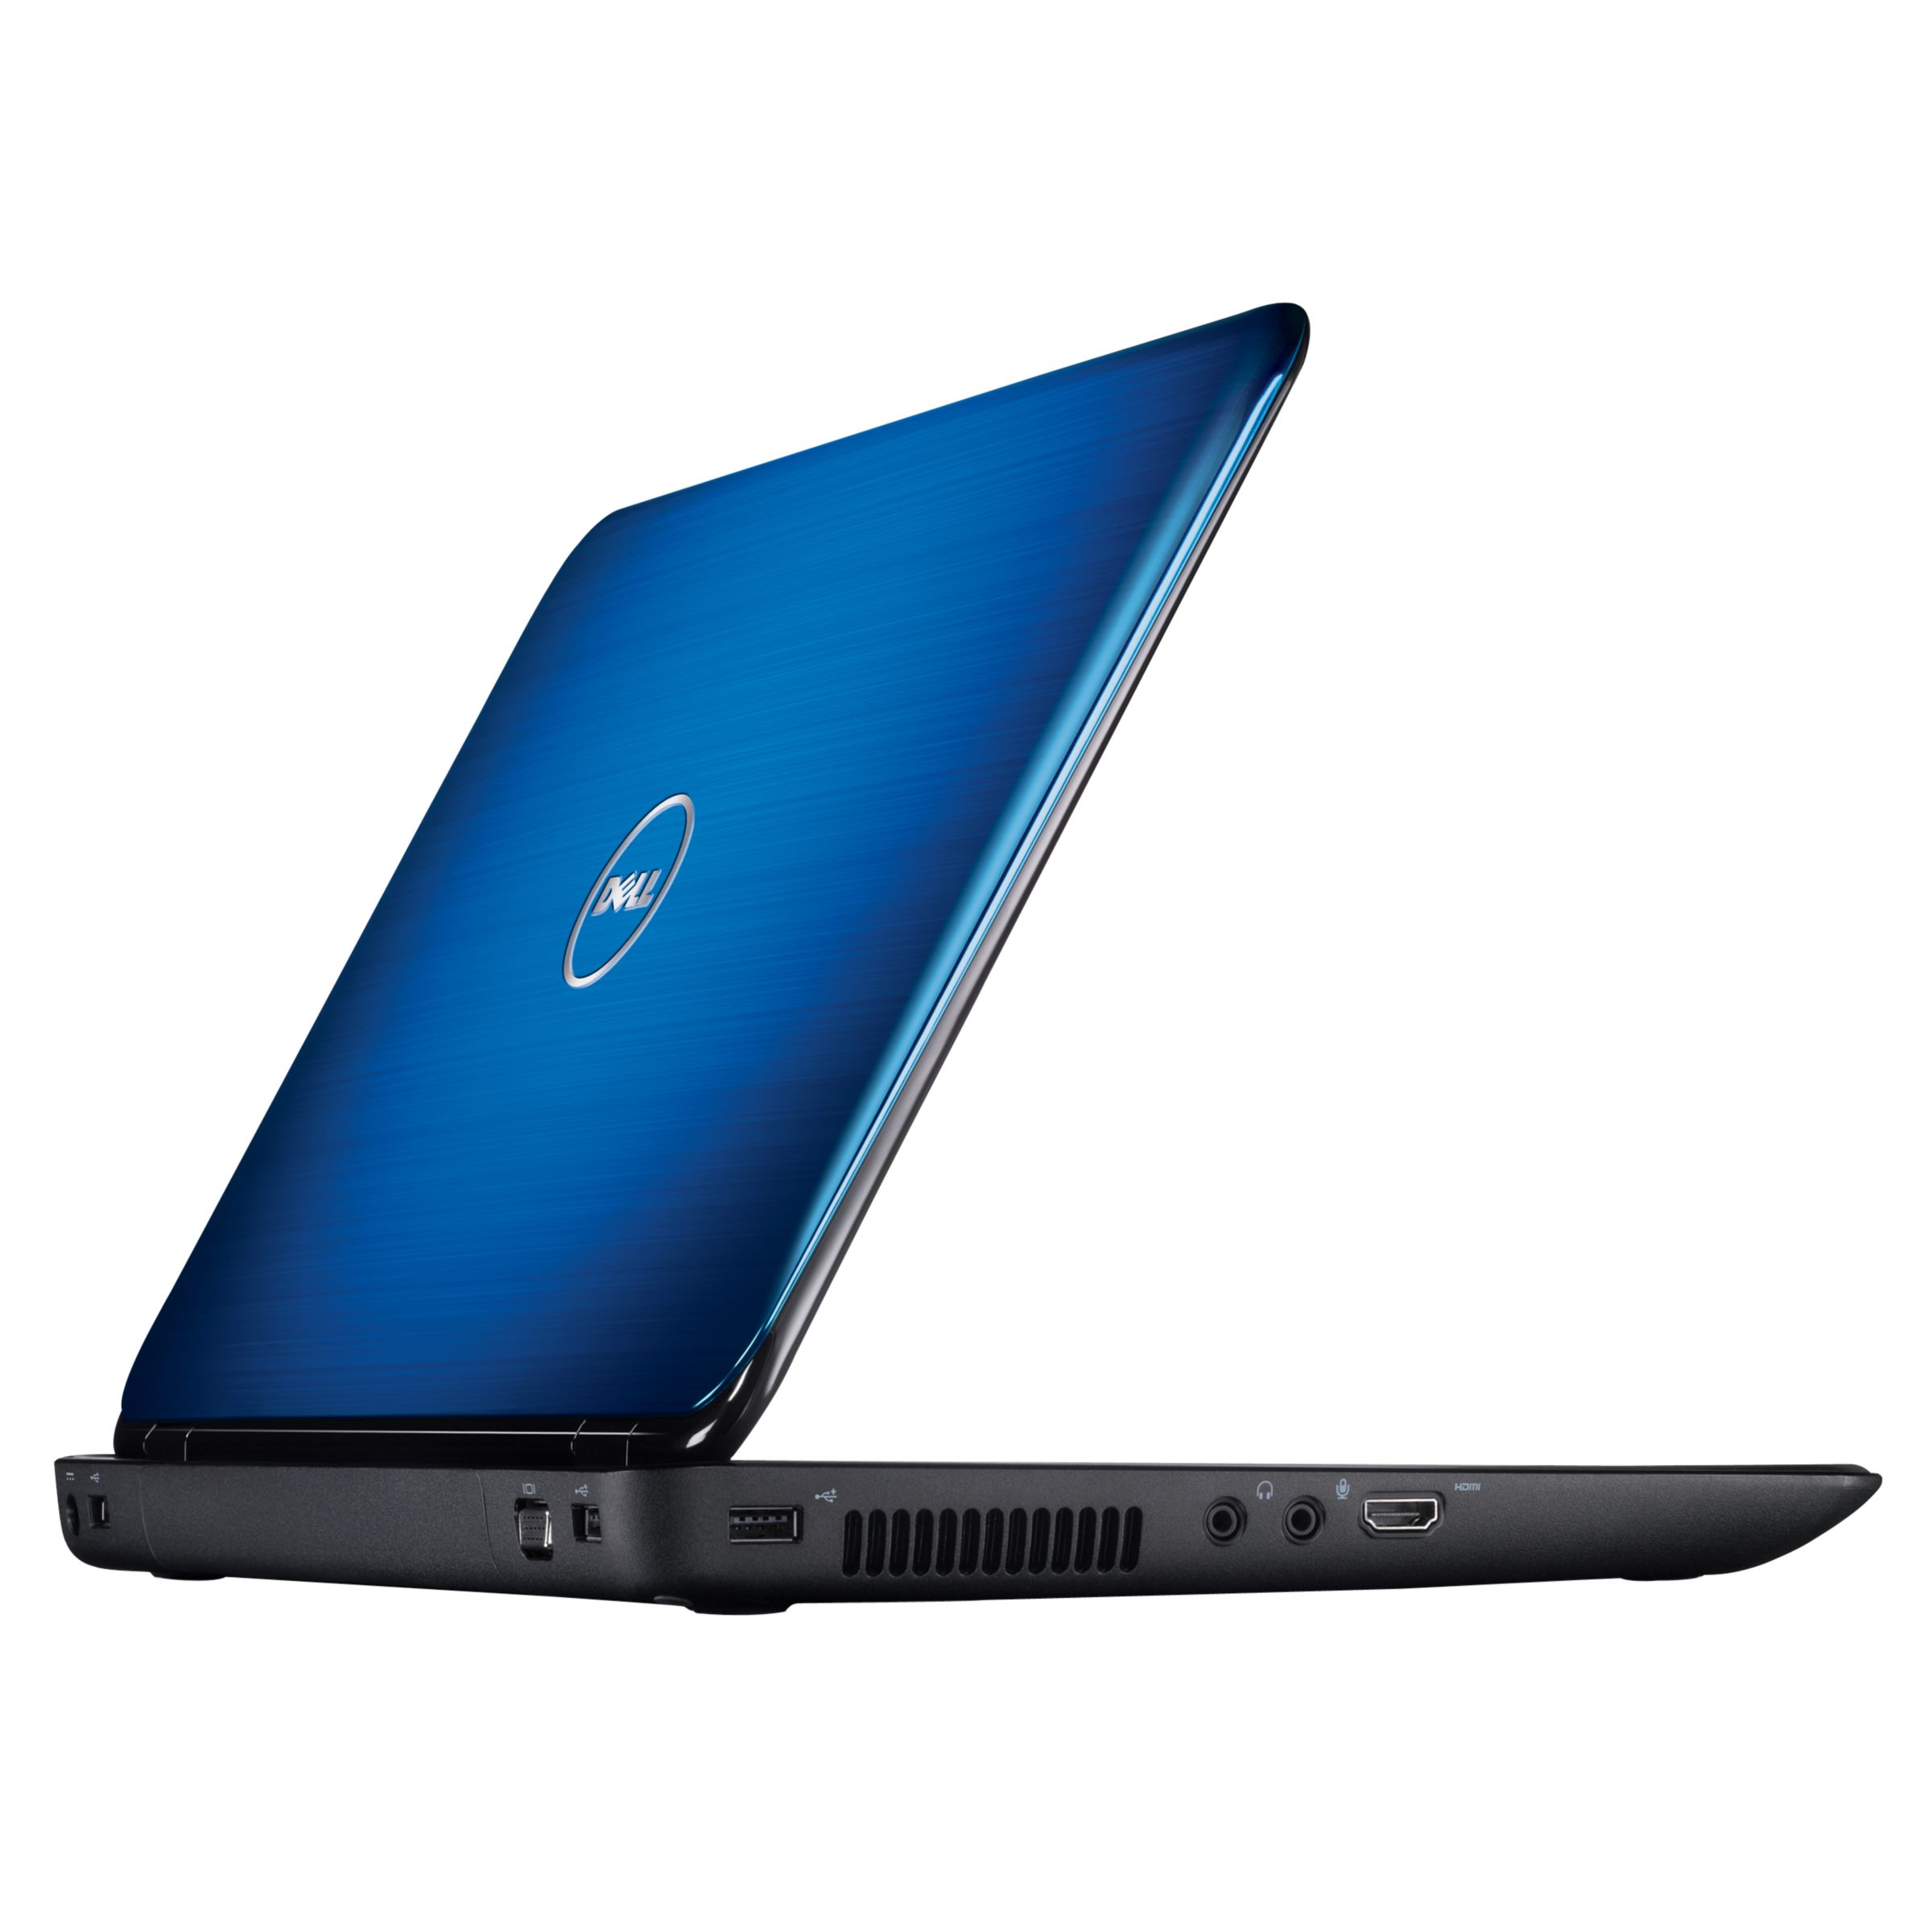 Dell Inspiron 15R Laptop, Intel Core i3, 500GB, 2.4GHz, 4GB RAM with 15.6 Inch Display at John Lewis